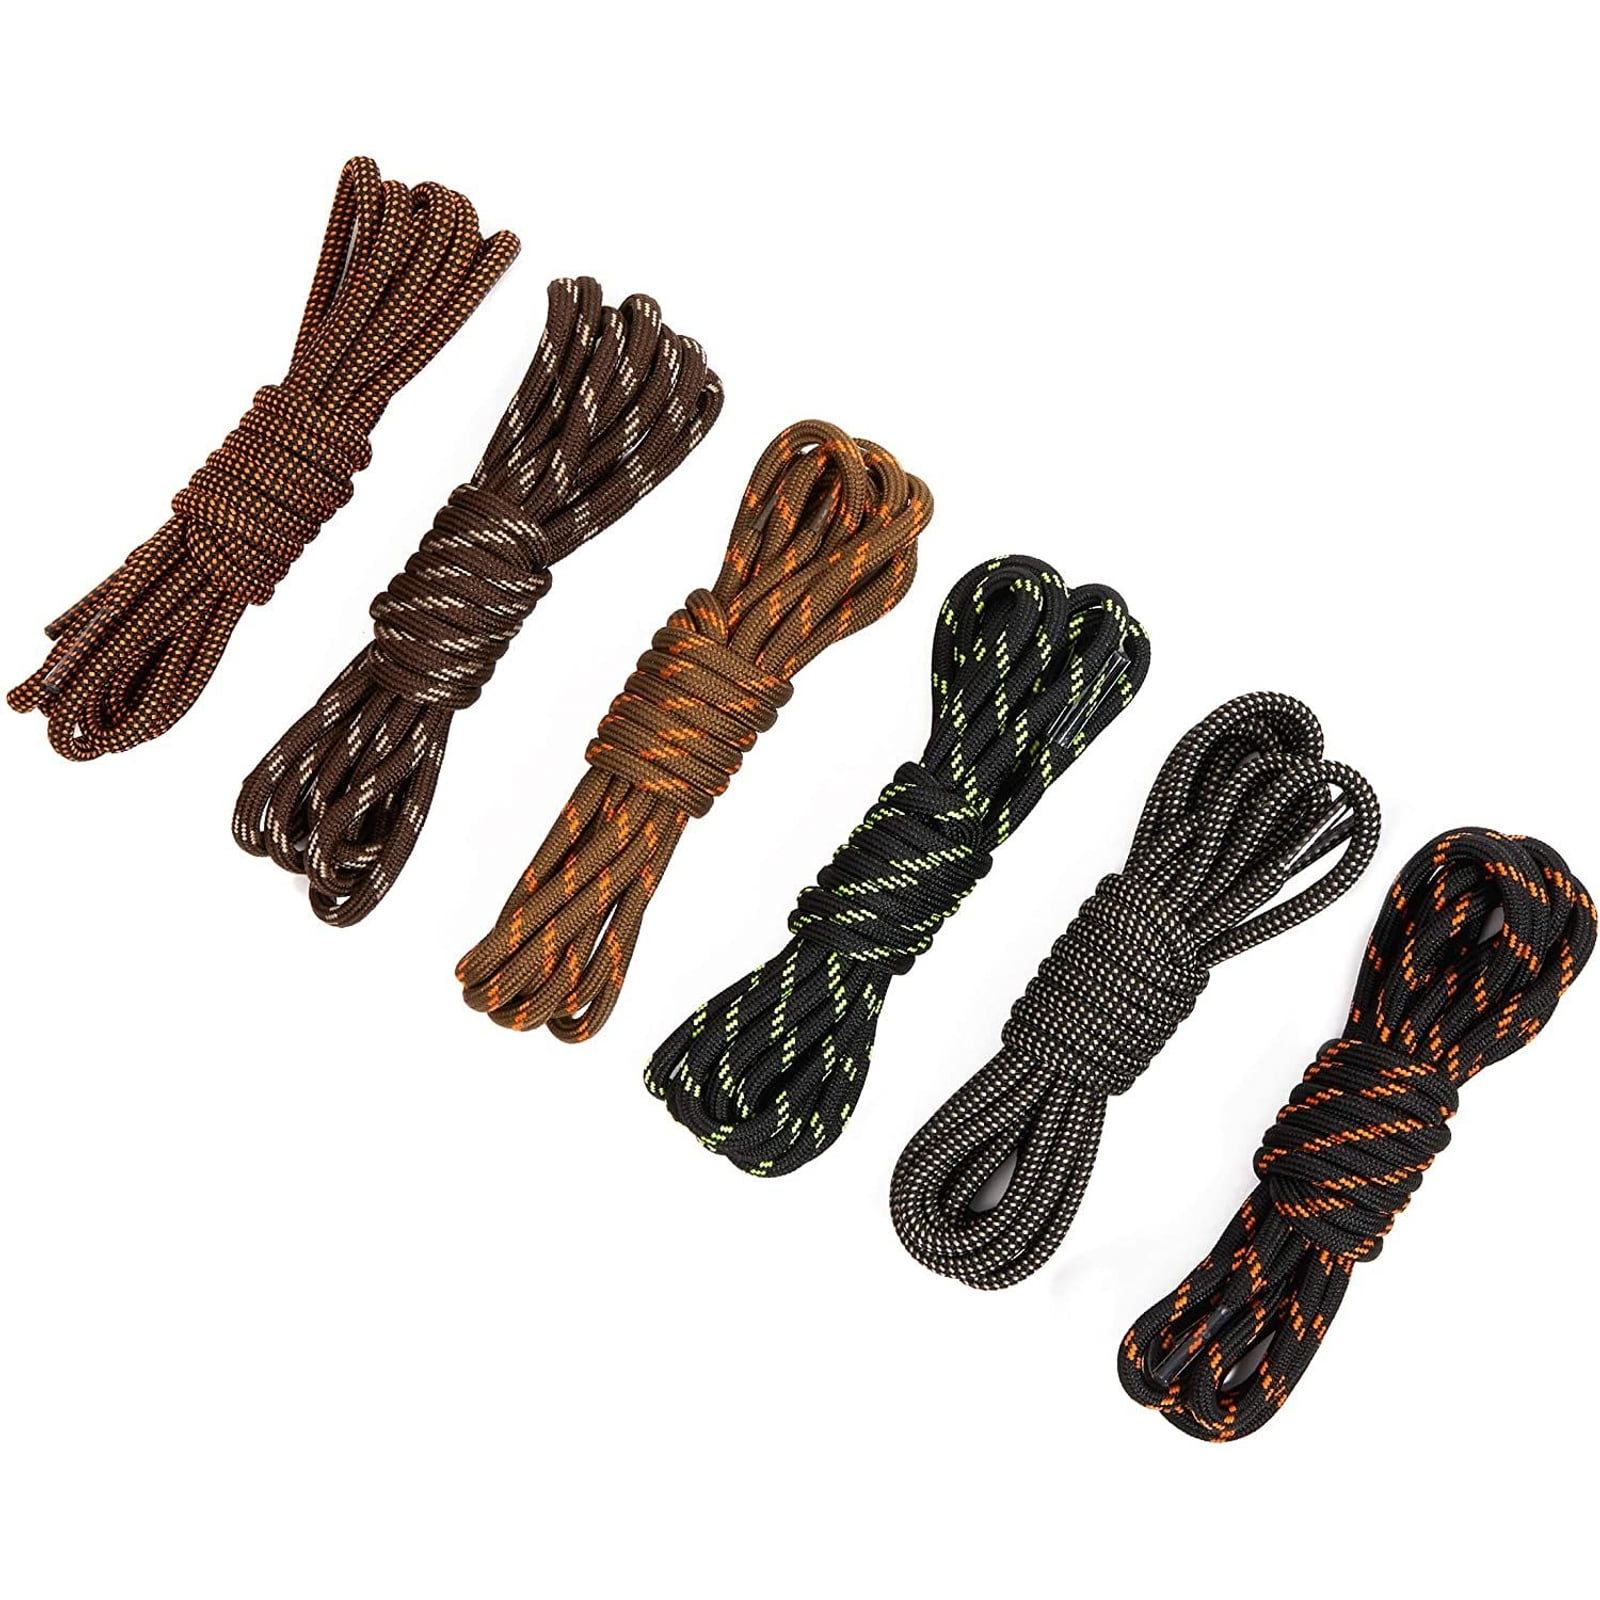 Round Shoelace Shoelaces Shoe Lace for Athletic Sport Hiking Work Boots Sneaker